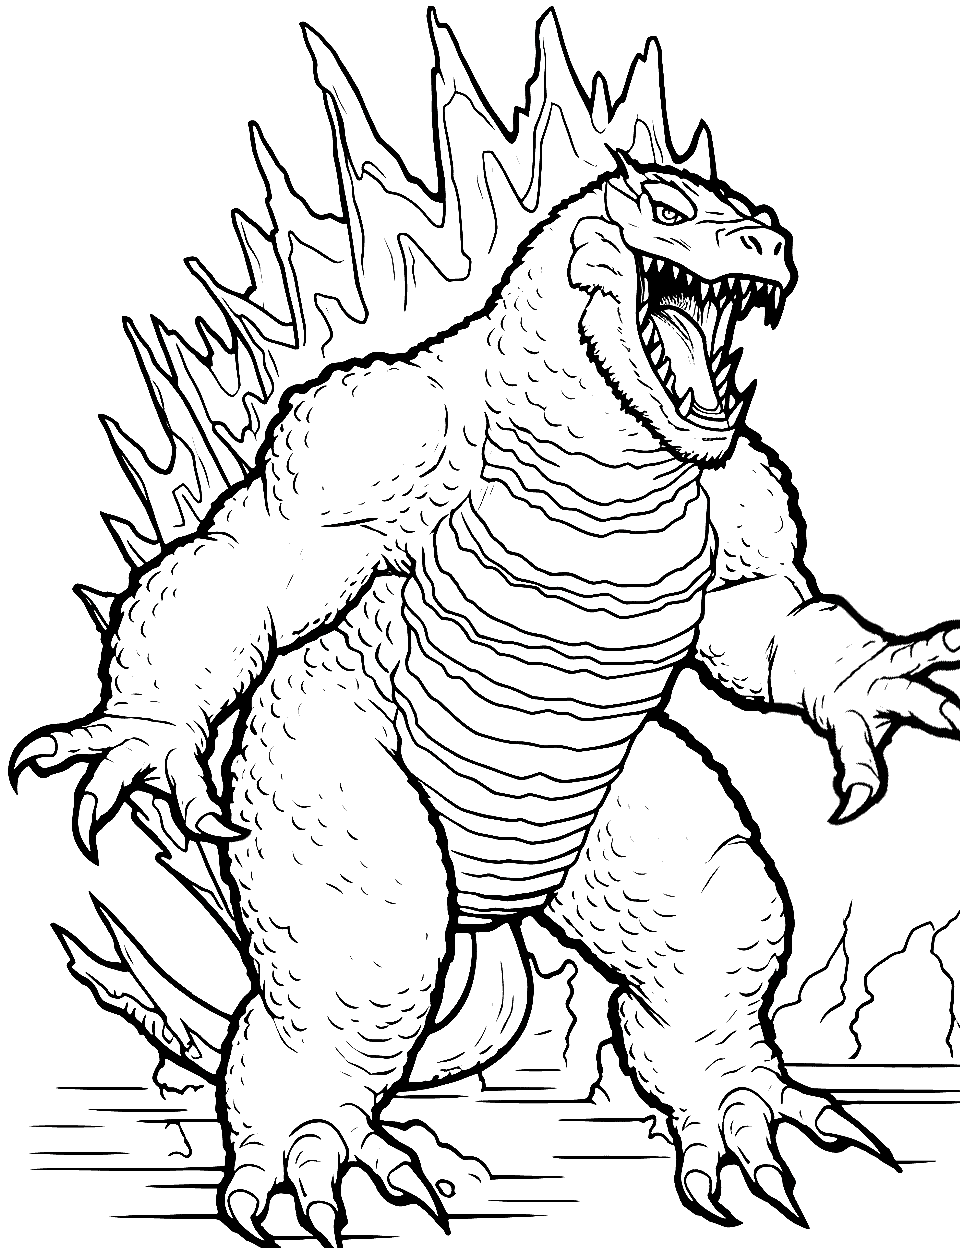 Super Godzilla's Charge Coloring Page - Super Godzilla charging up its energy, with glowing spines.